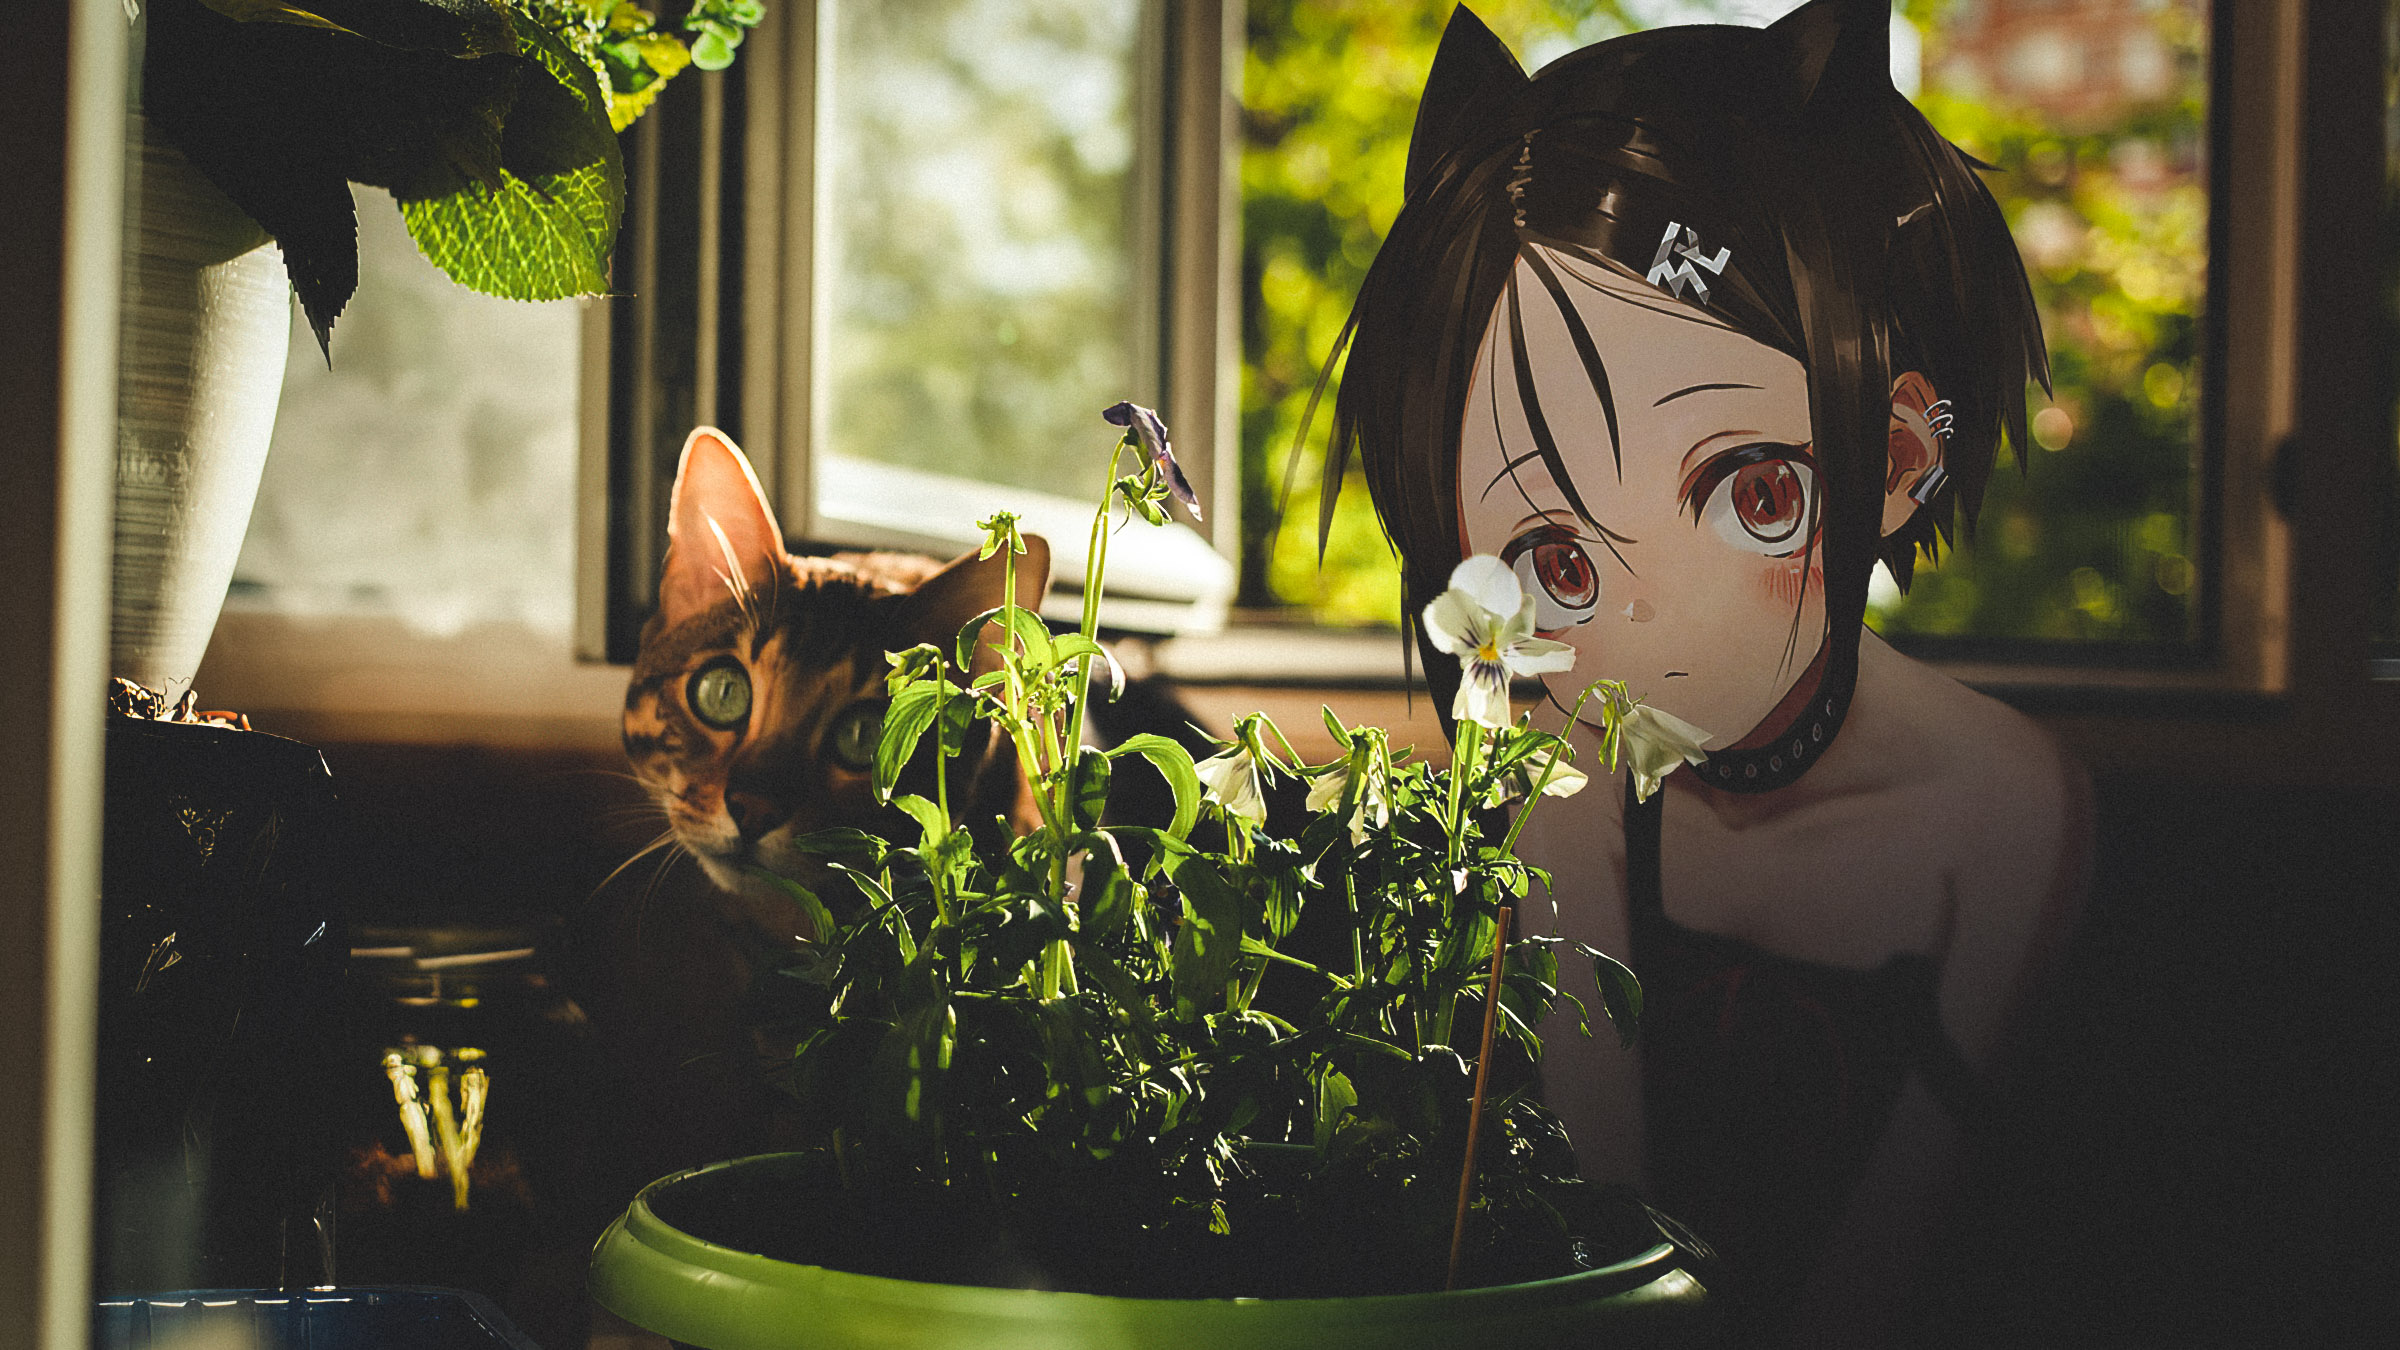 Anime Anime Irl Collage Plant Pot By The Window Cats Looking At Viewer Cat Girl 2400x1350